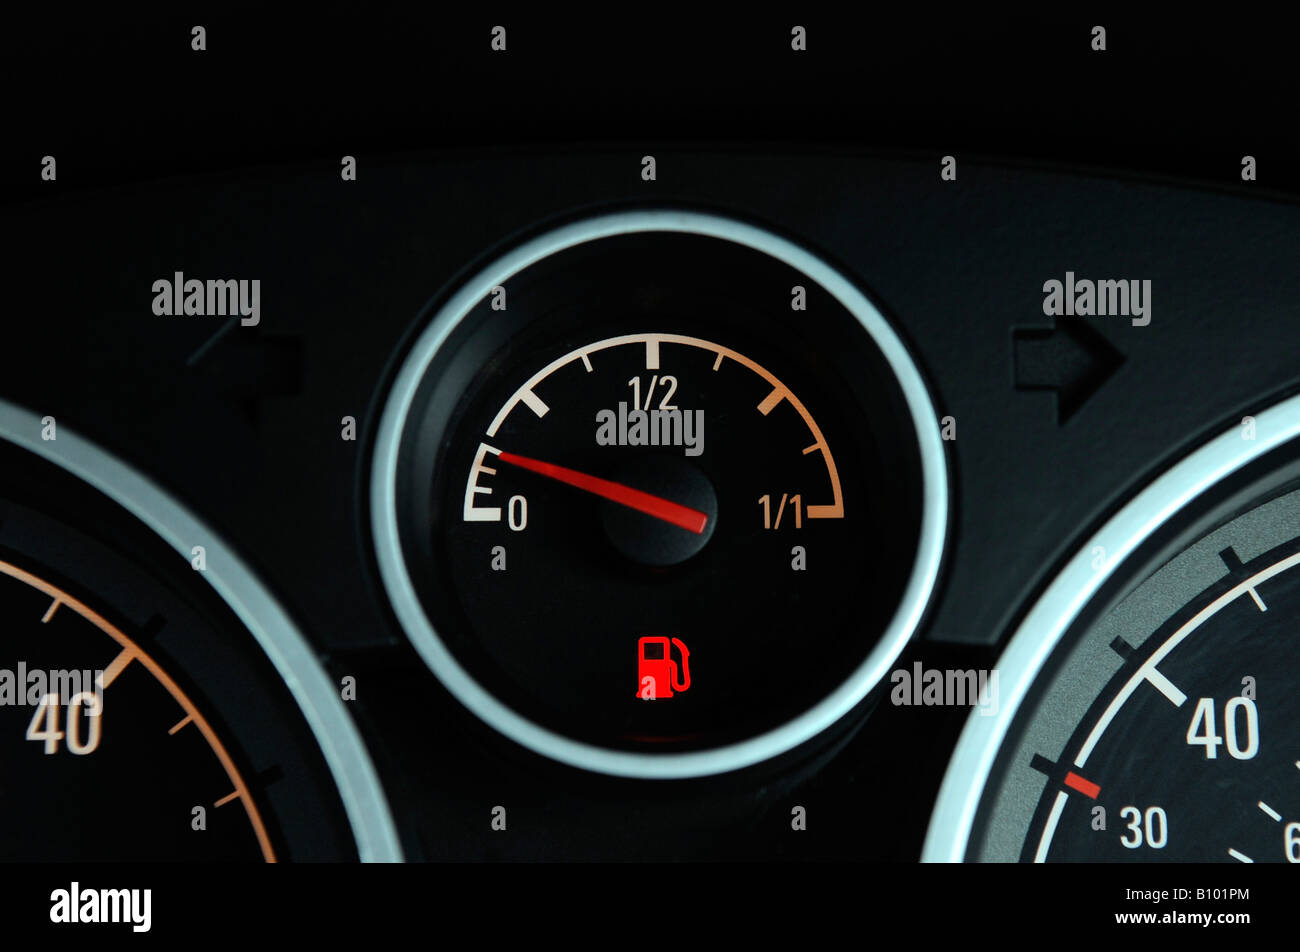 A BRITISH CAR FUEL GAUGE SHOWING LOW FUEL WITH RED WARNING LIGHT,UK. Stock Photo